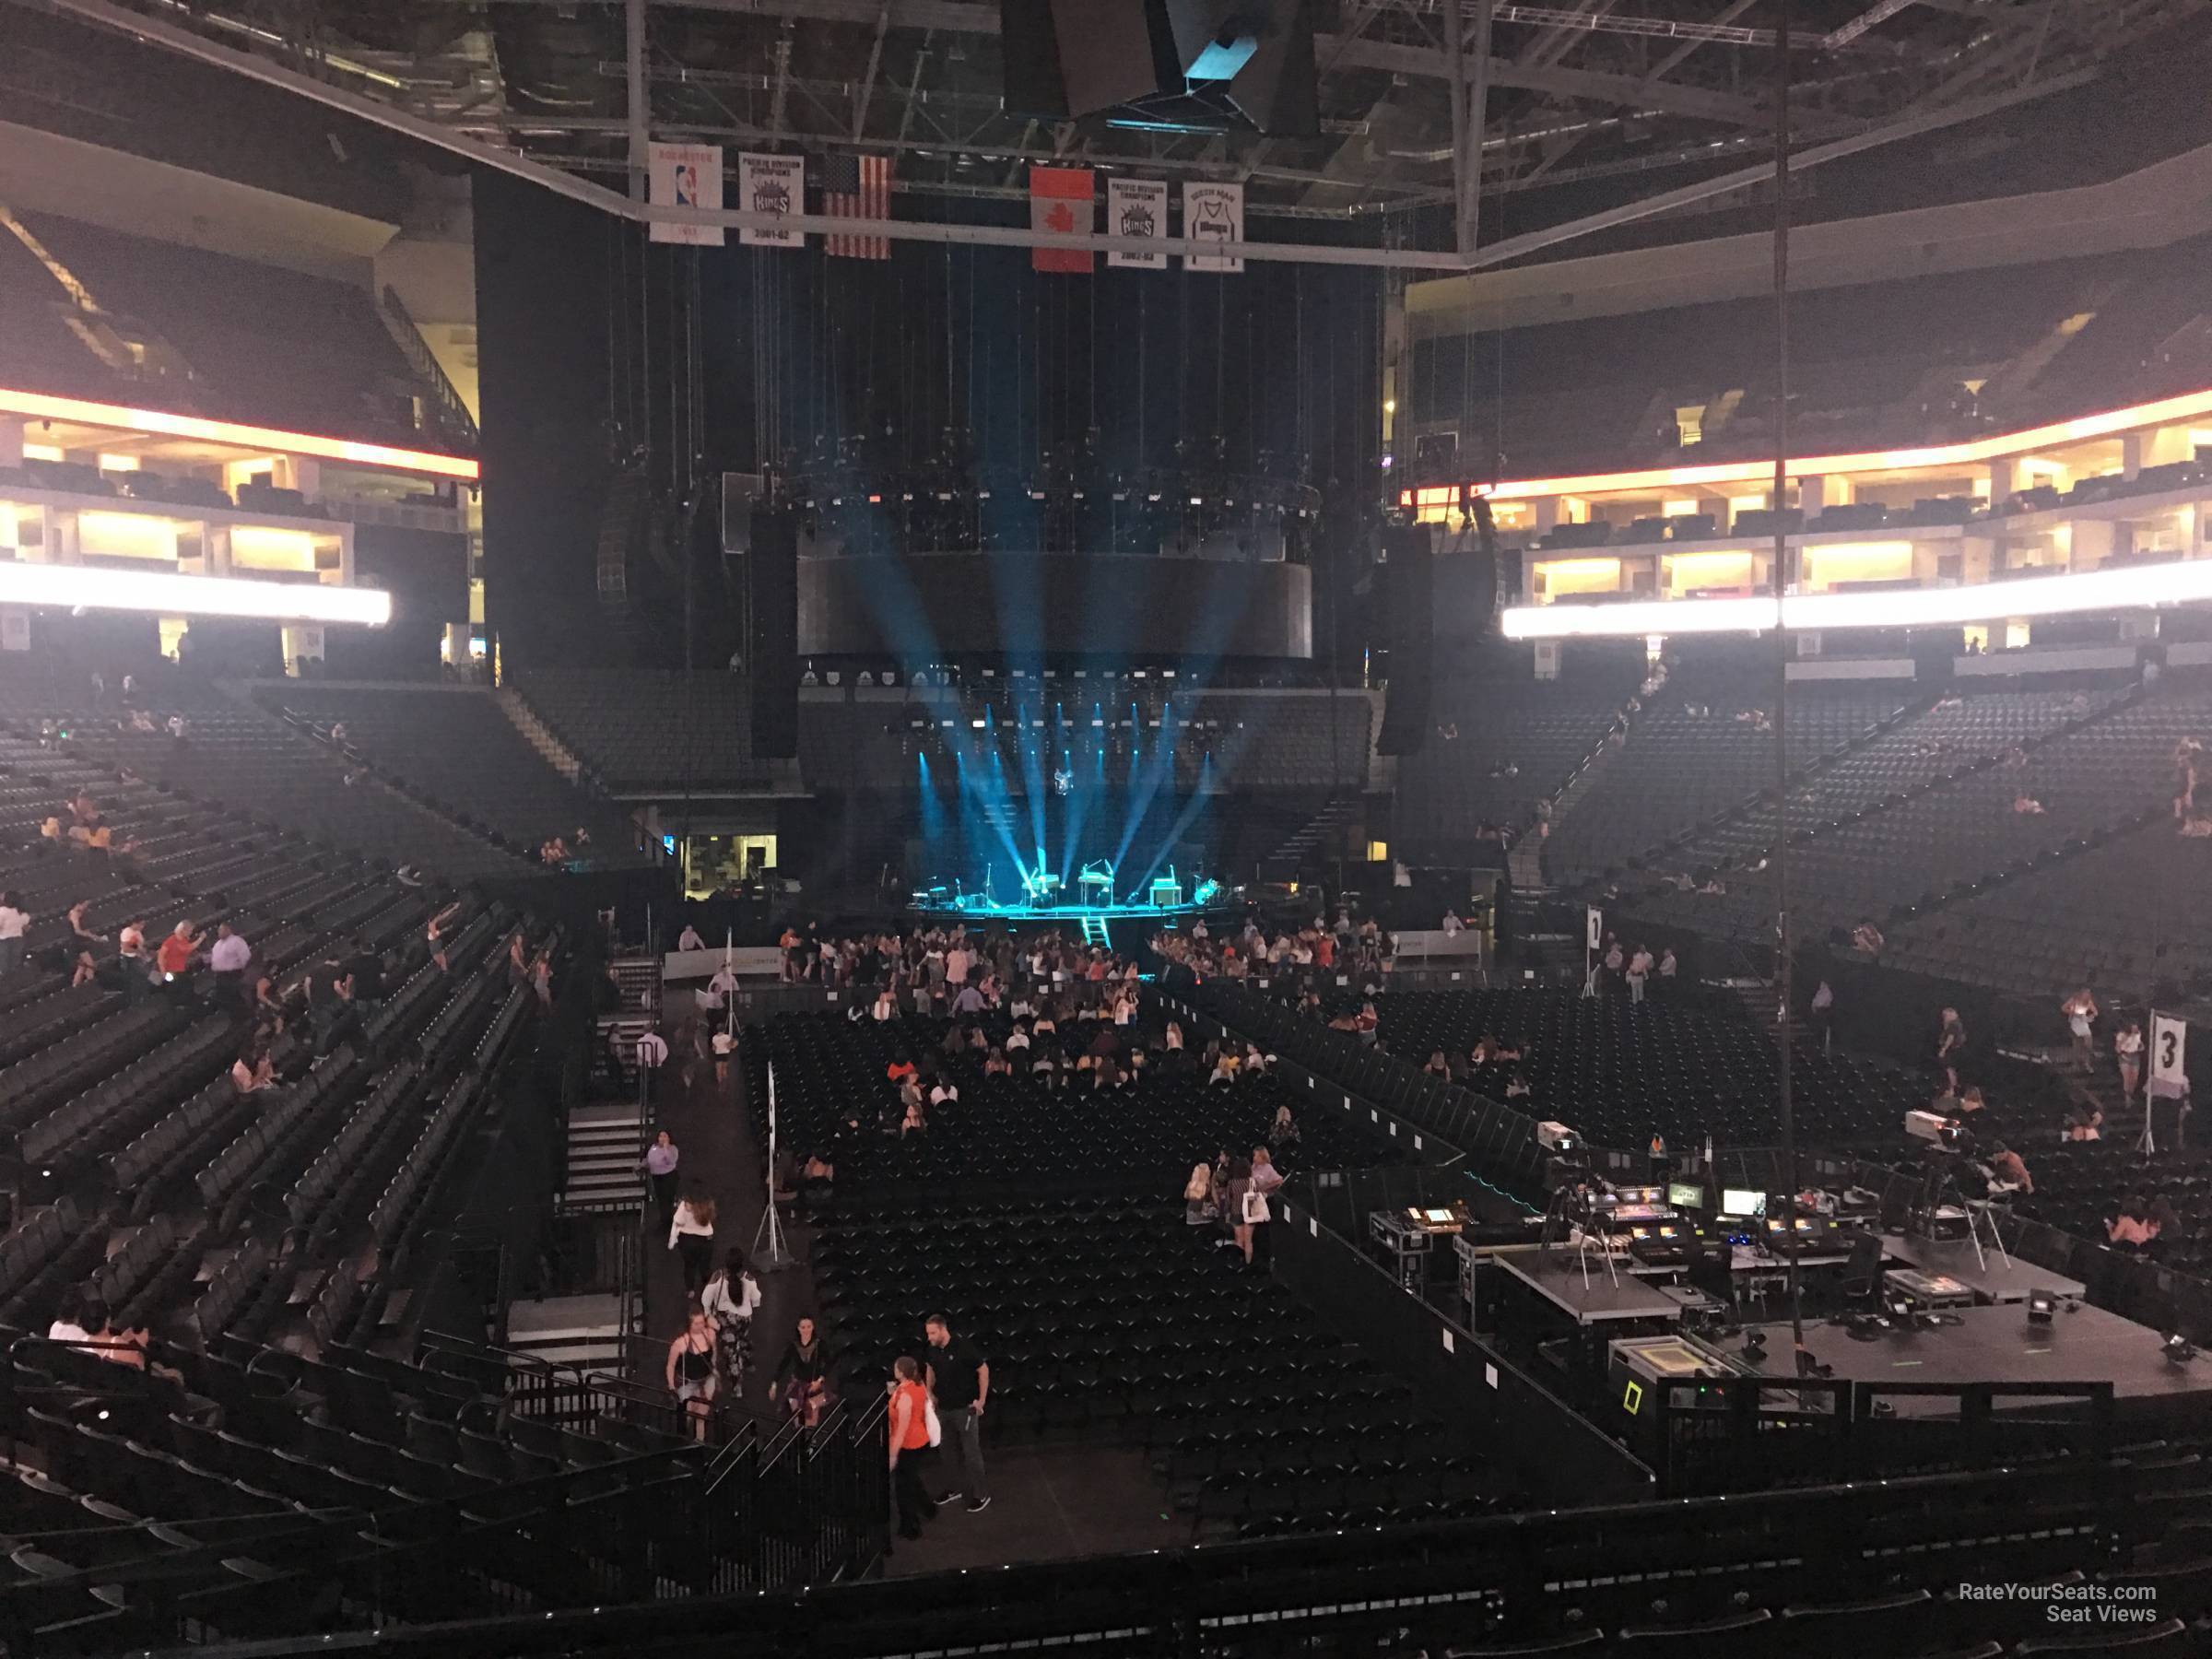 Section 115 at Golden 1 Center for Concerts - RateYourSeats.com